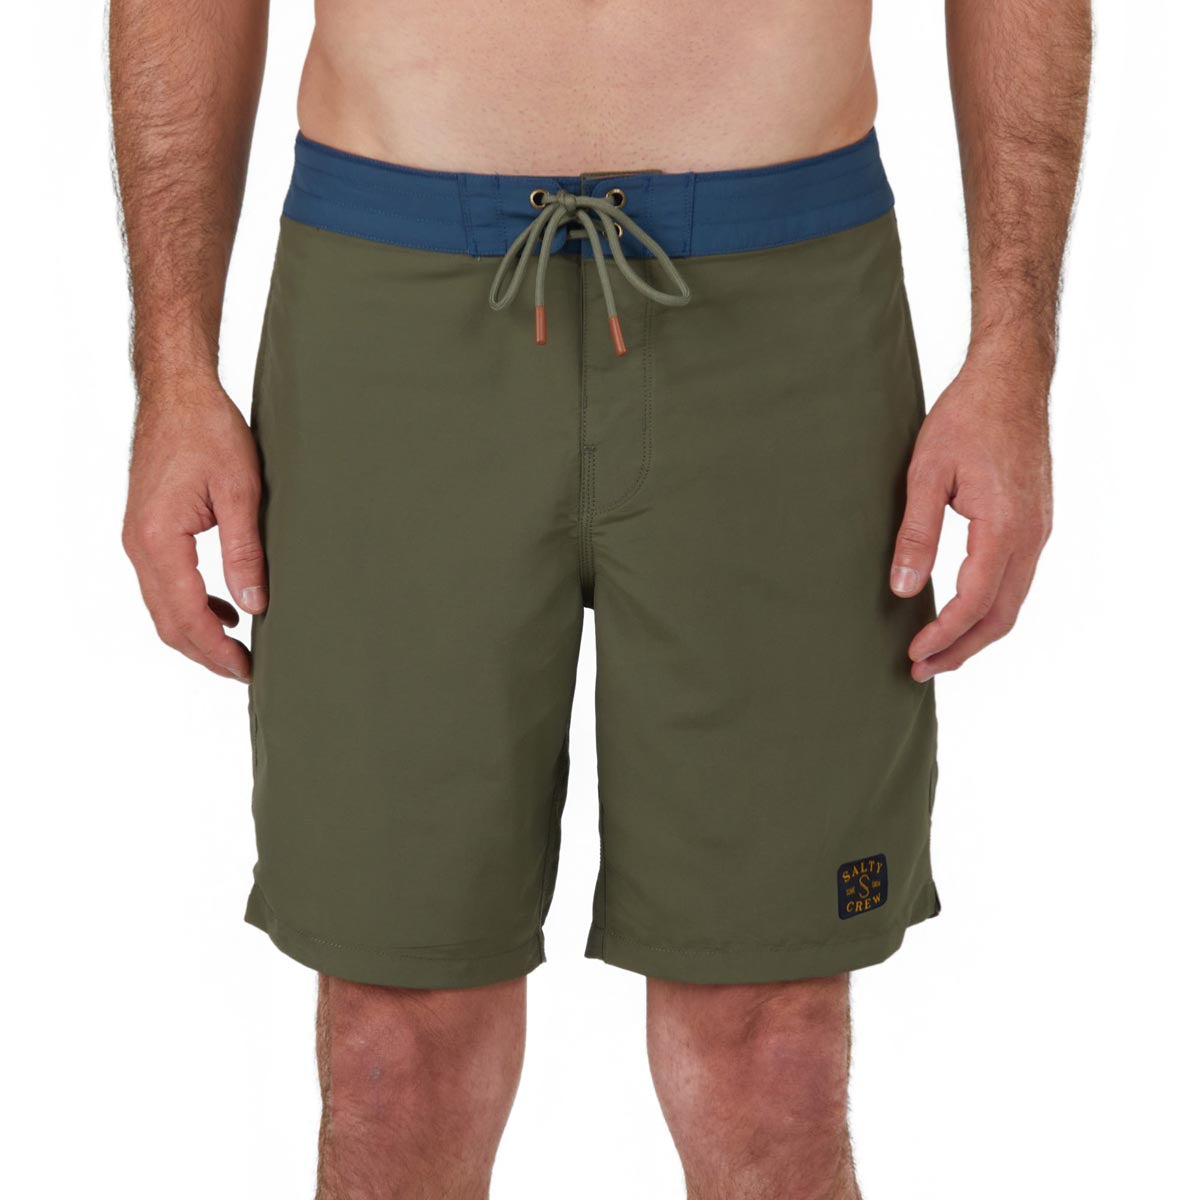 Salty Crew Clubhouse Board Shorts - Olive image 2